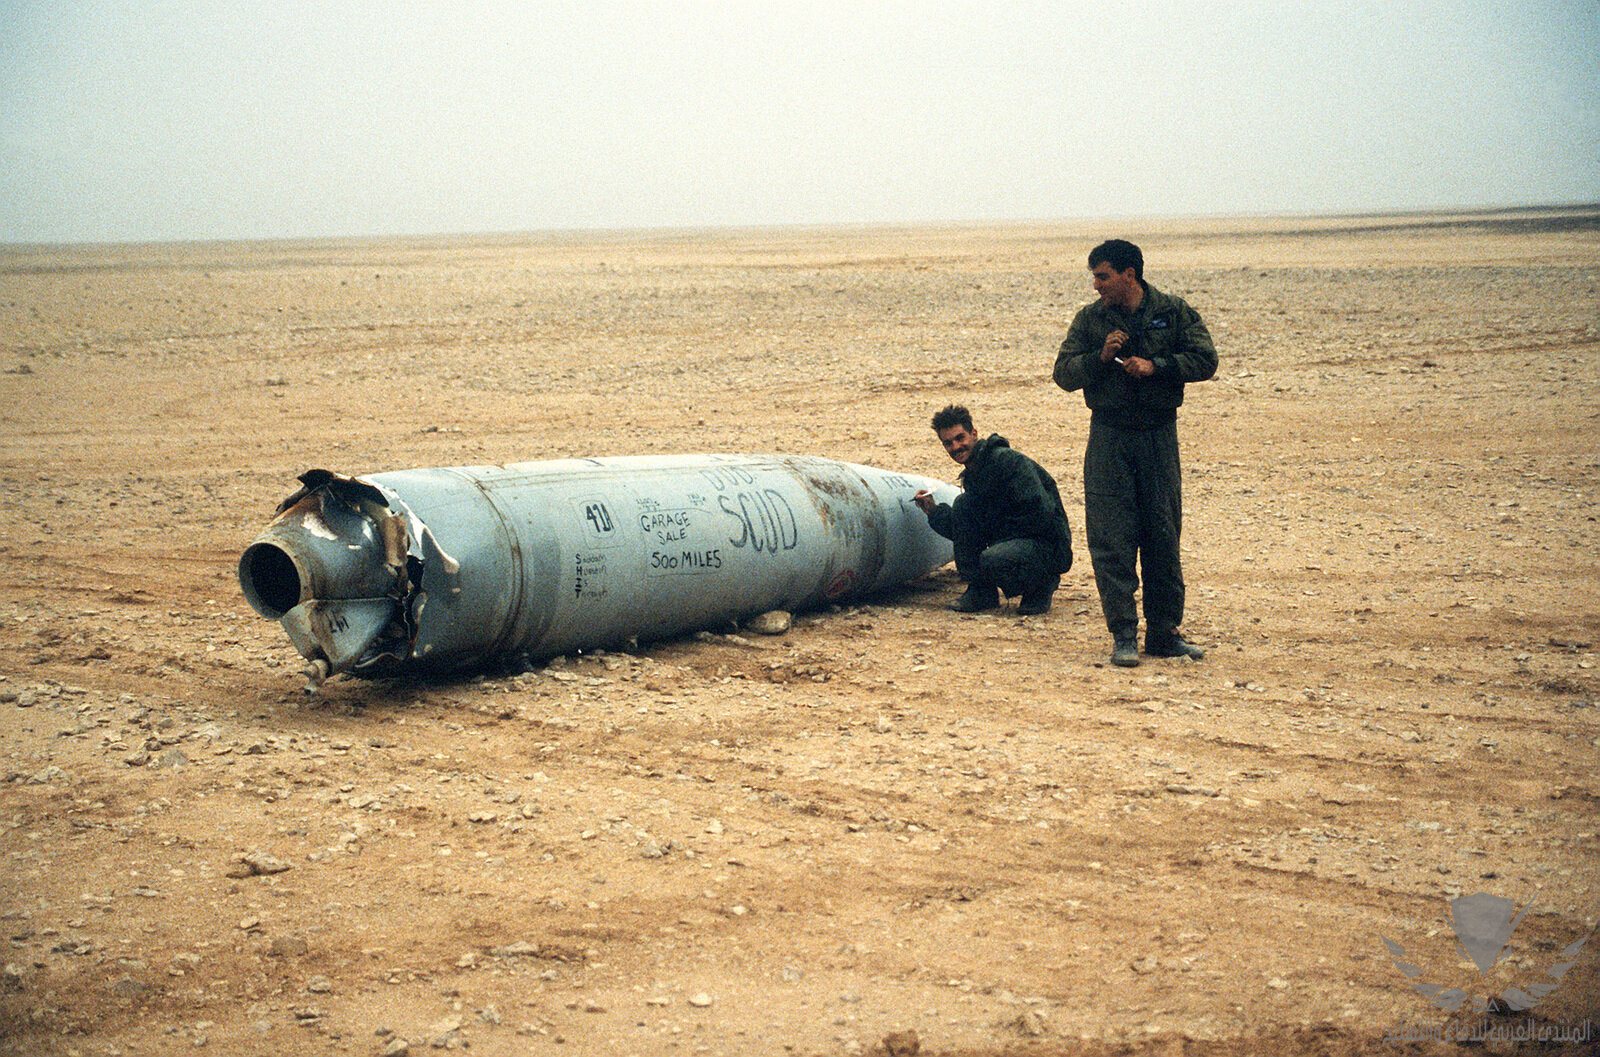 an-allied-soldier-draws-on-an-iraqi-scud-missile-that-has-been-shot-down-during-0c4d38-1600.jpg